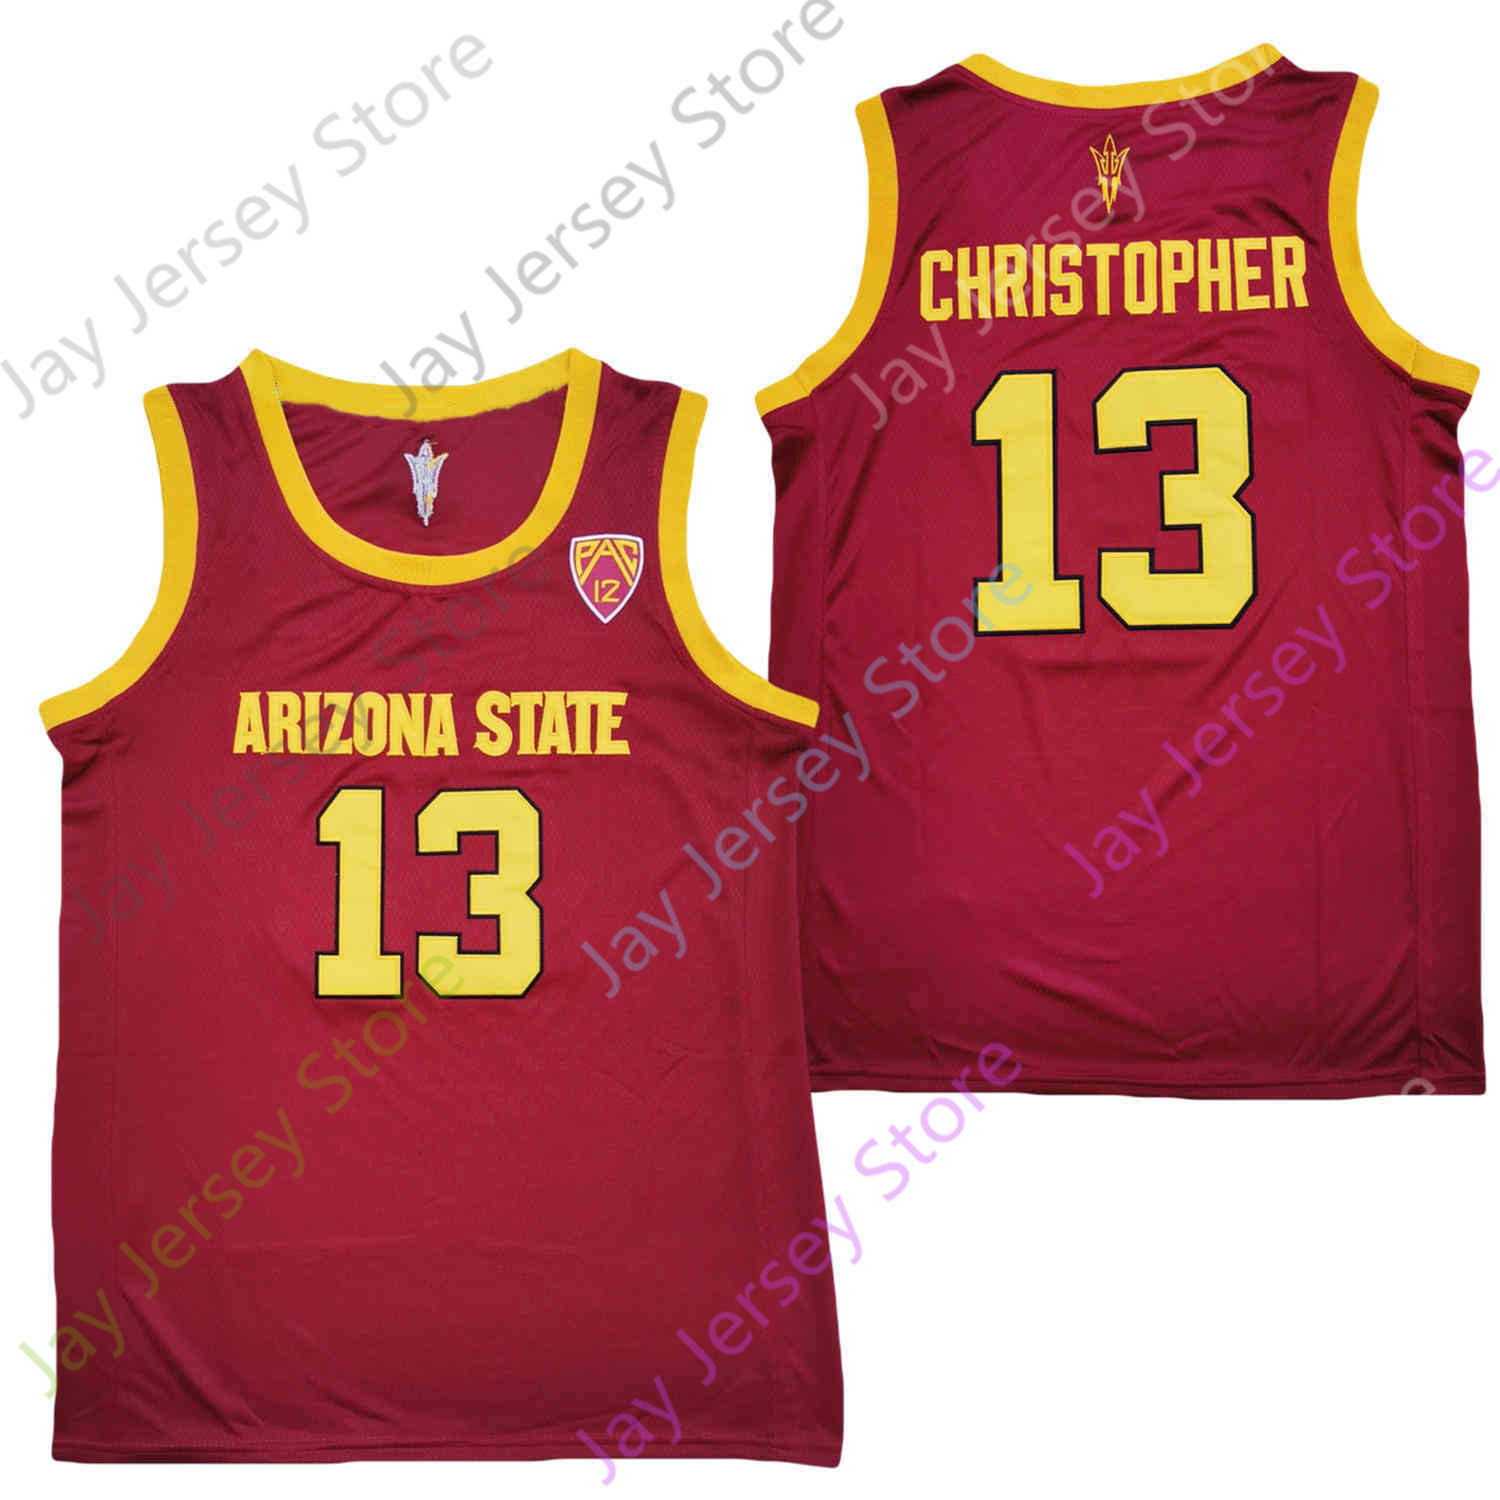 

2020 New NCAA College Arizona State Sun Devils ASU Jerseys 13 Caleb Christopher Basketball Jersey Red White Size Youth Adult